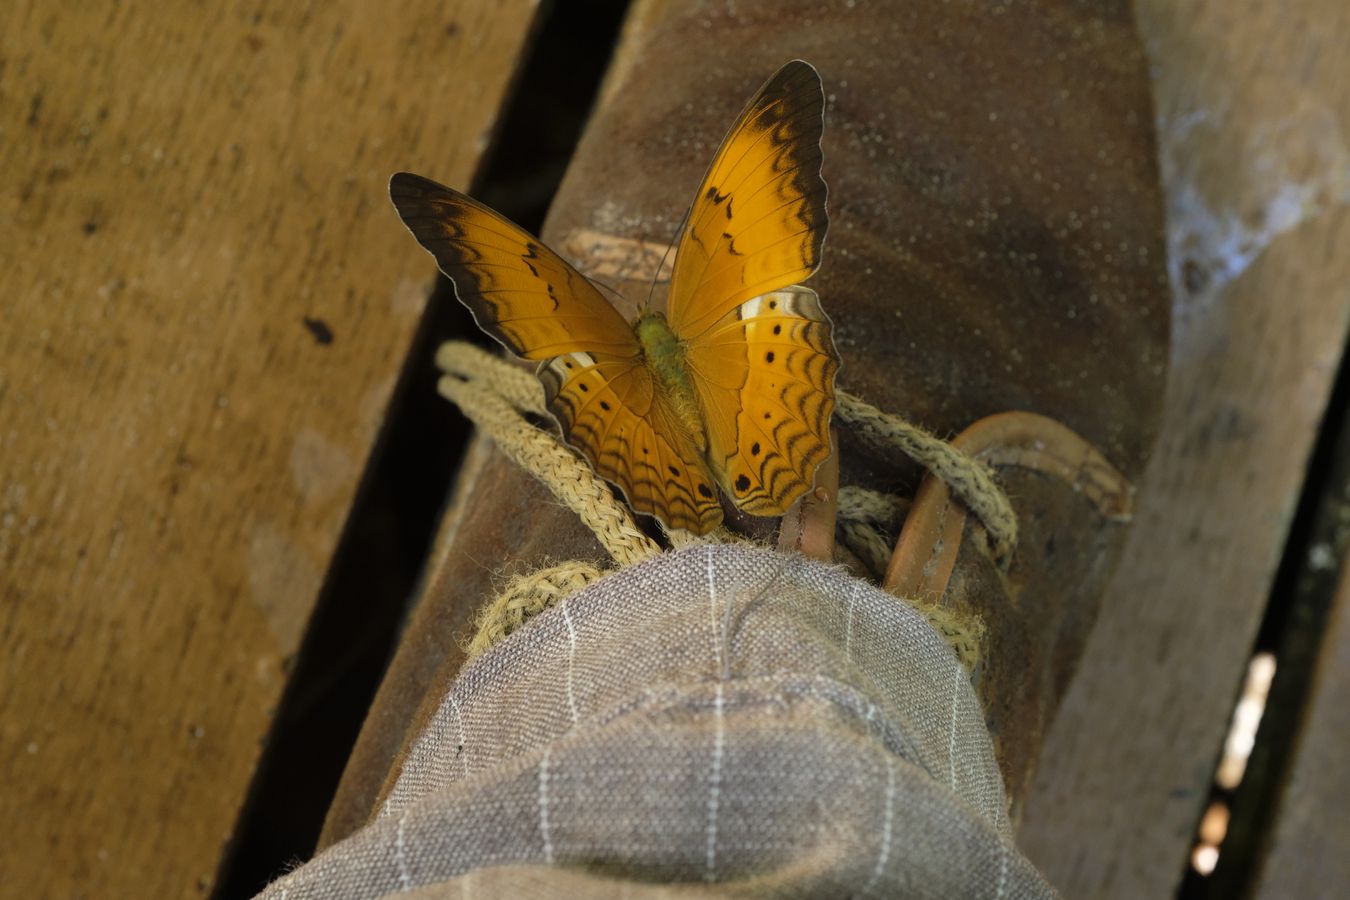 Malay Yeoman Butterfly Perched on My Shoe { Cirrochroa Emalea Emalea }